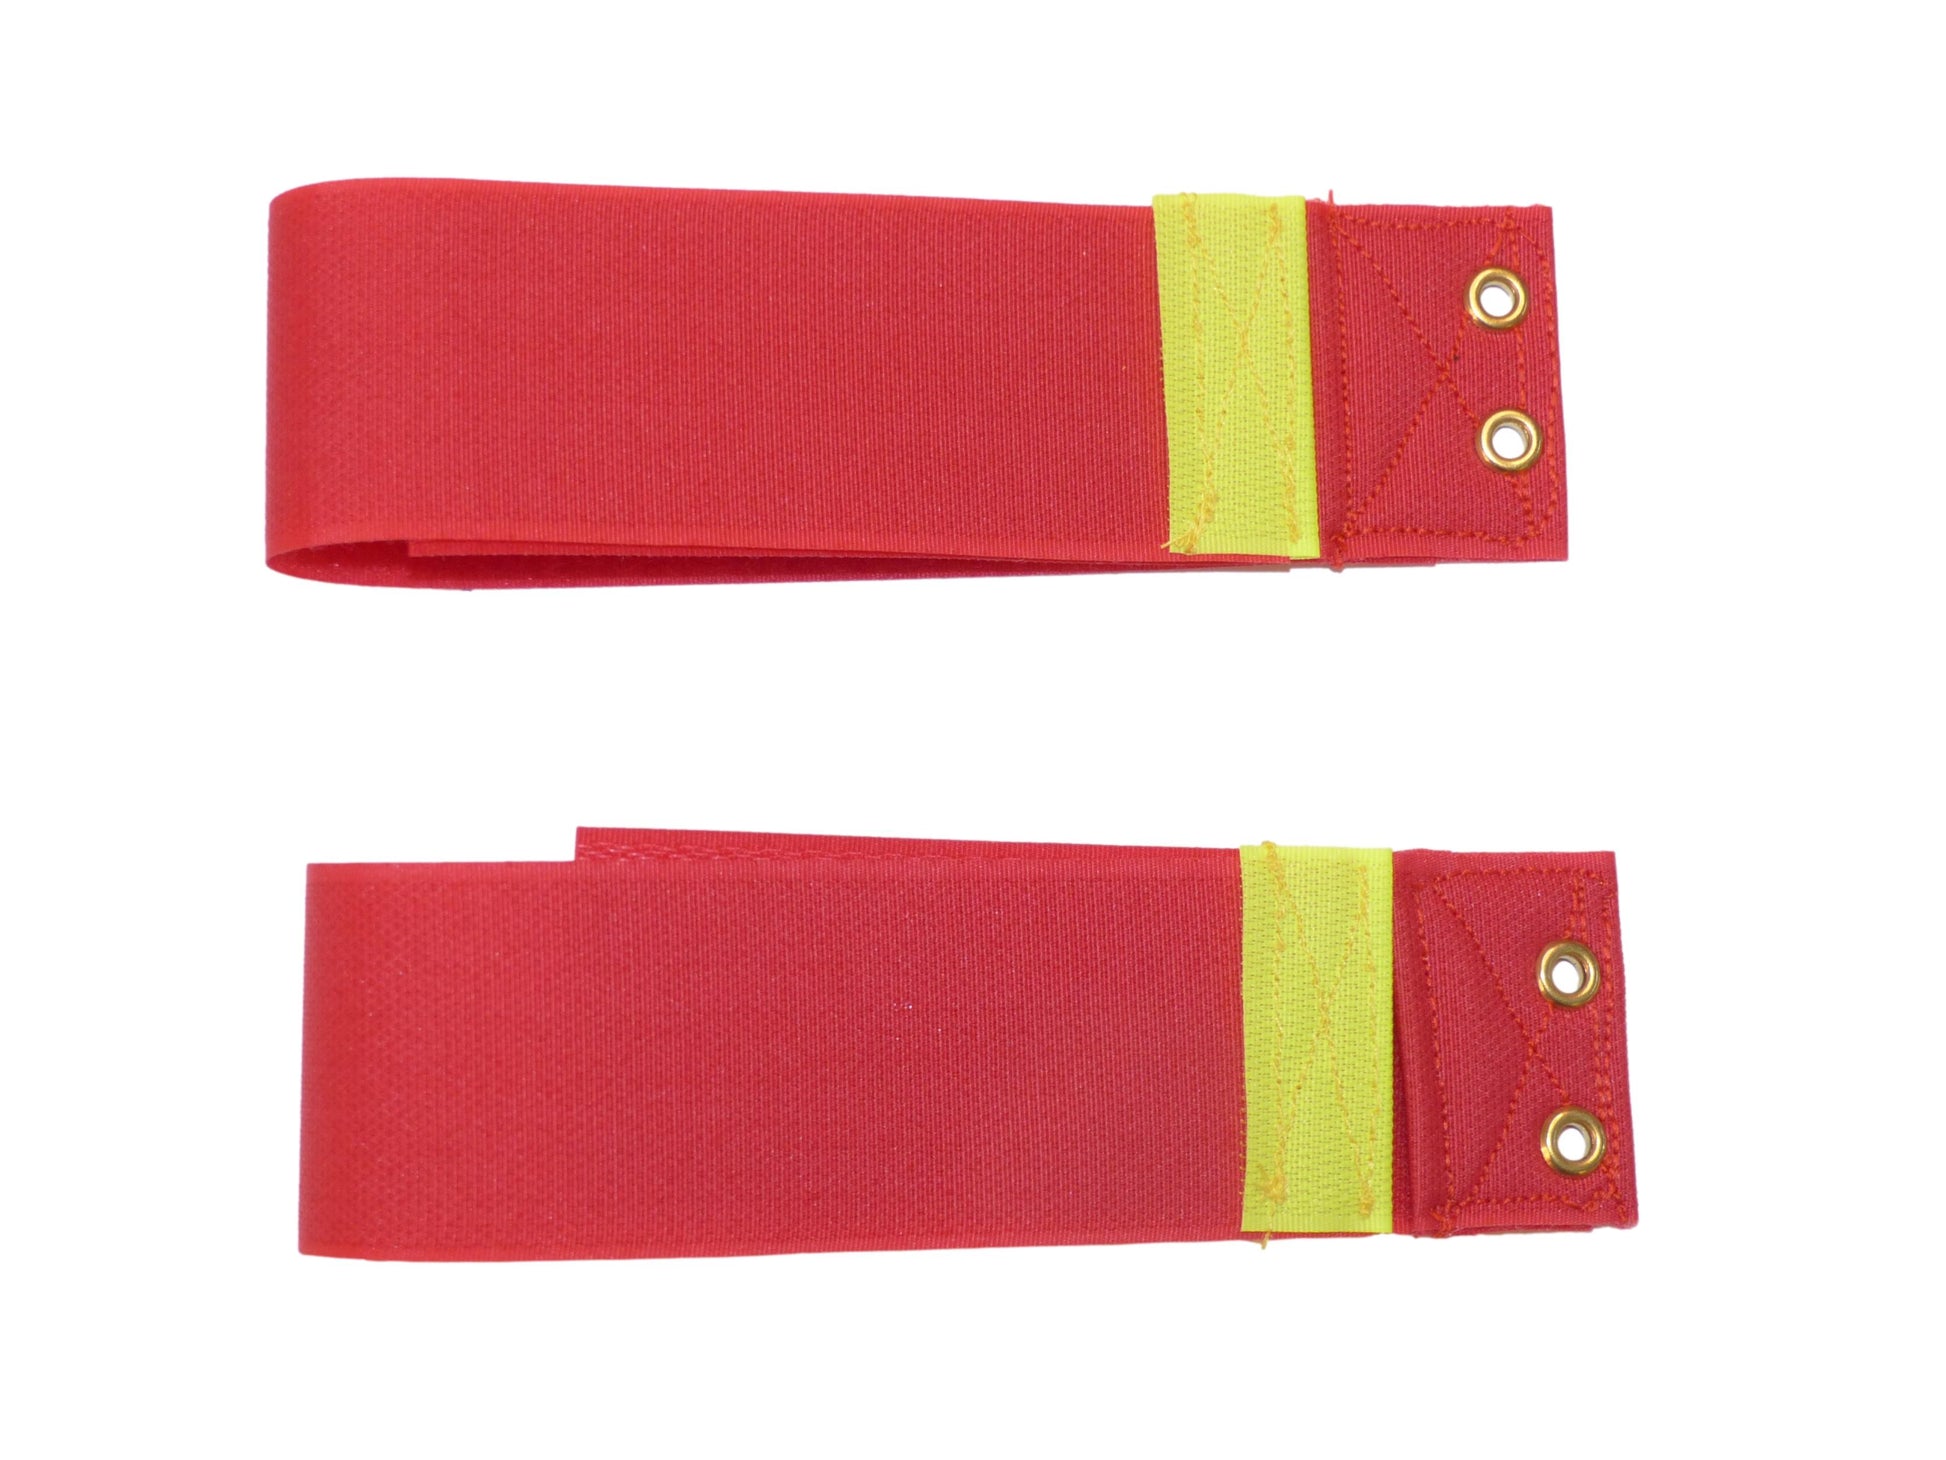 Premium 50mm Hook & Loop Tidy & Hang Strap with Eyelet (Pack of Two) i red